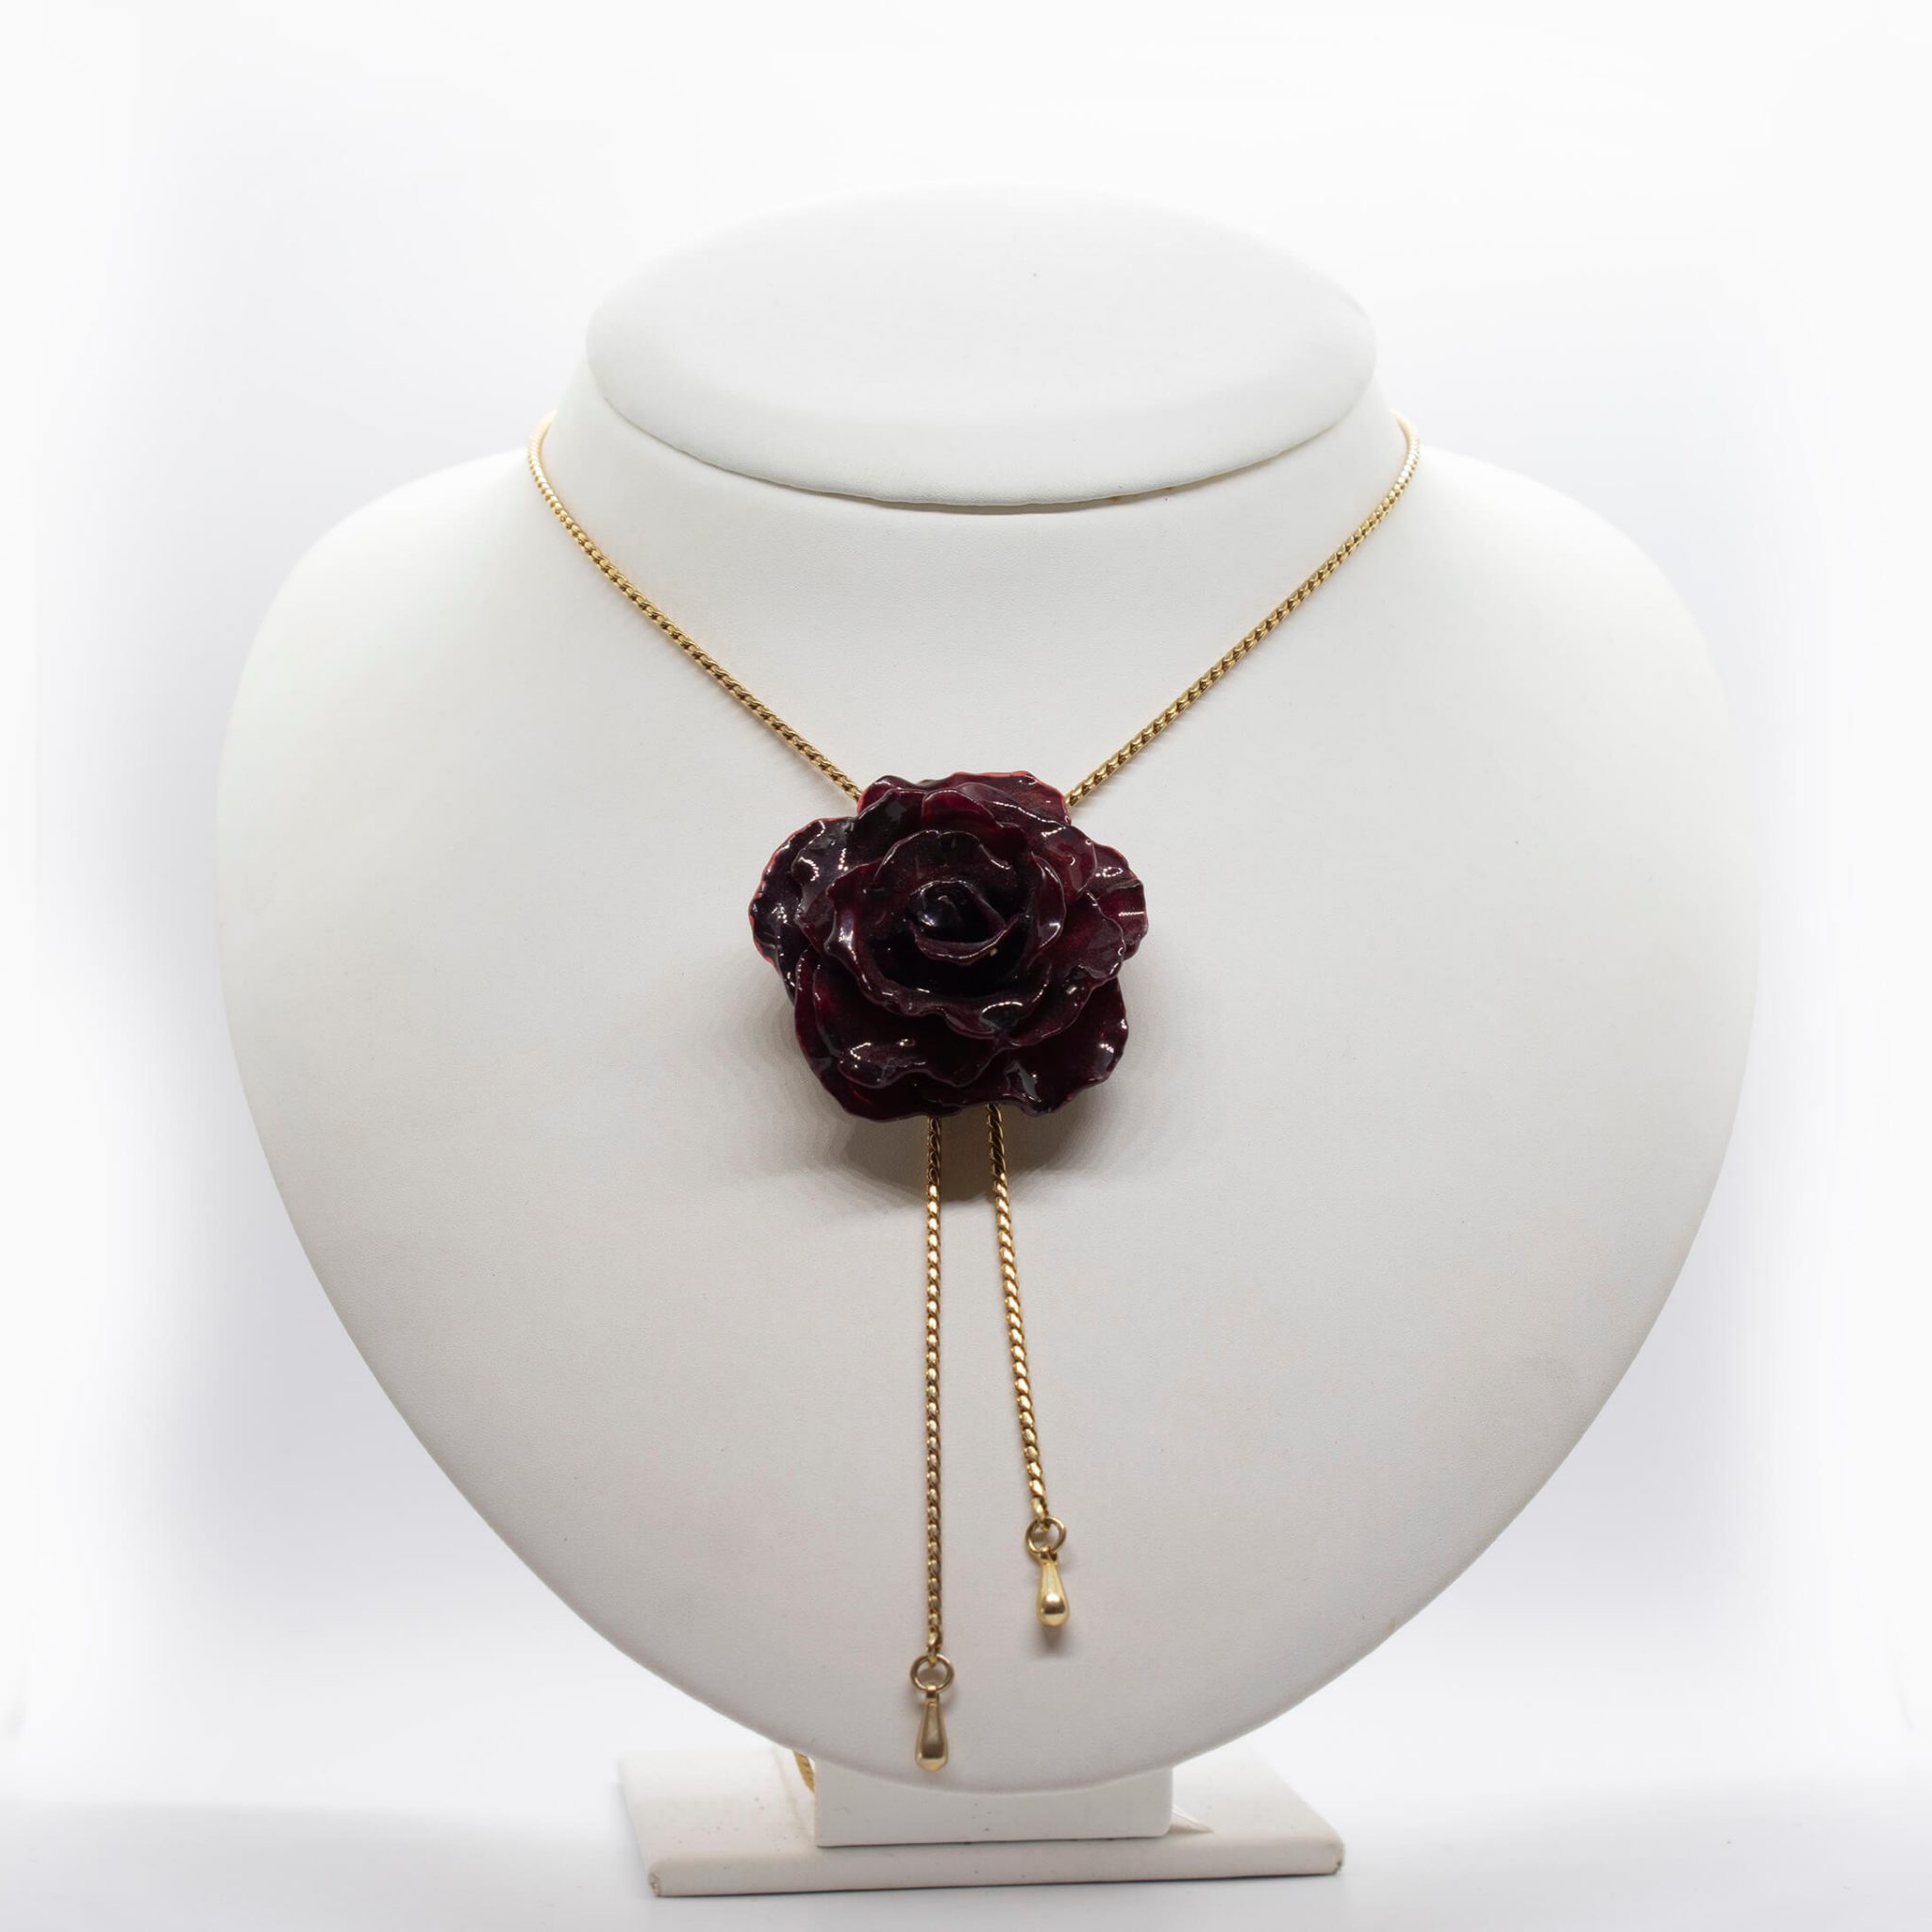 A real burgundy rose flower necklace - Sara's Jewellery